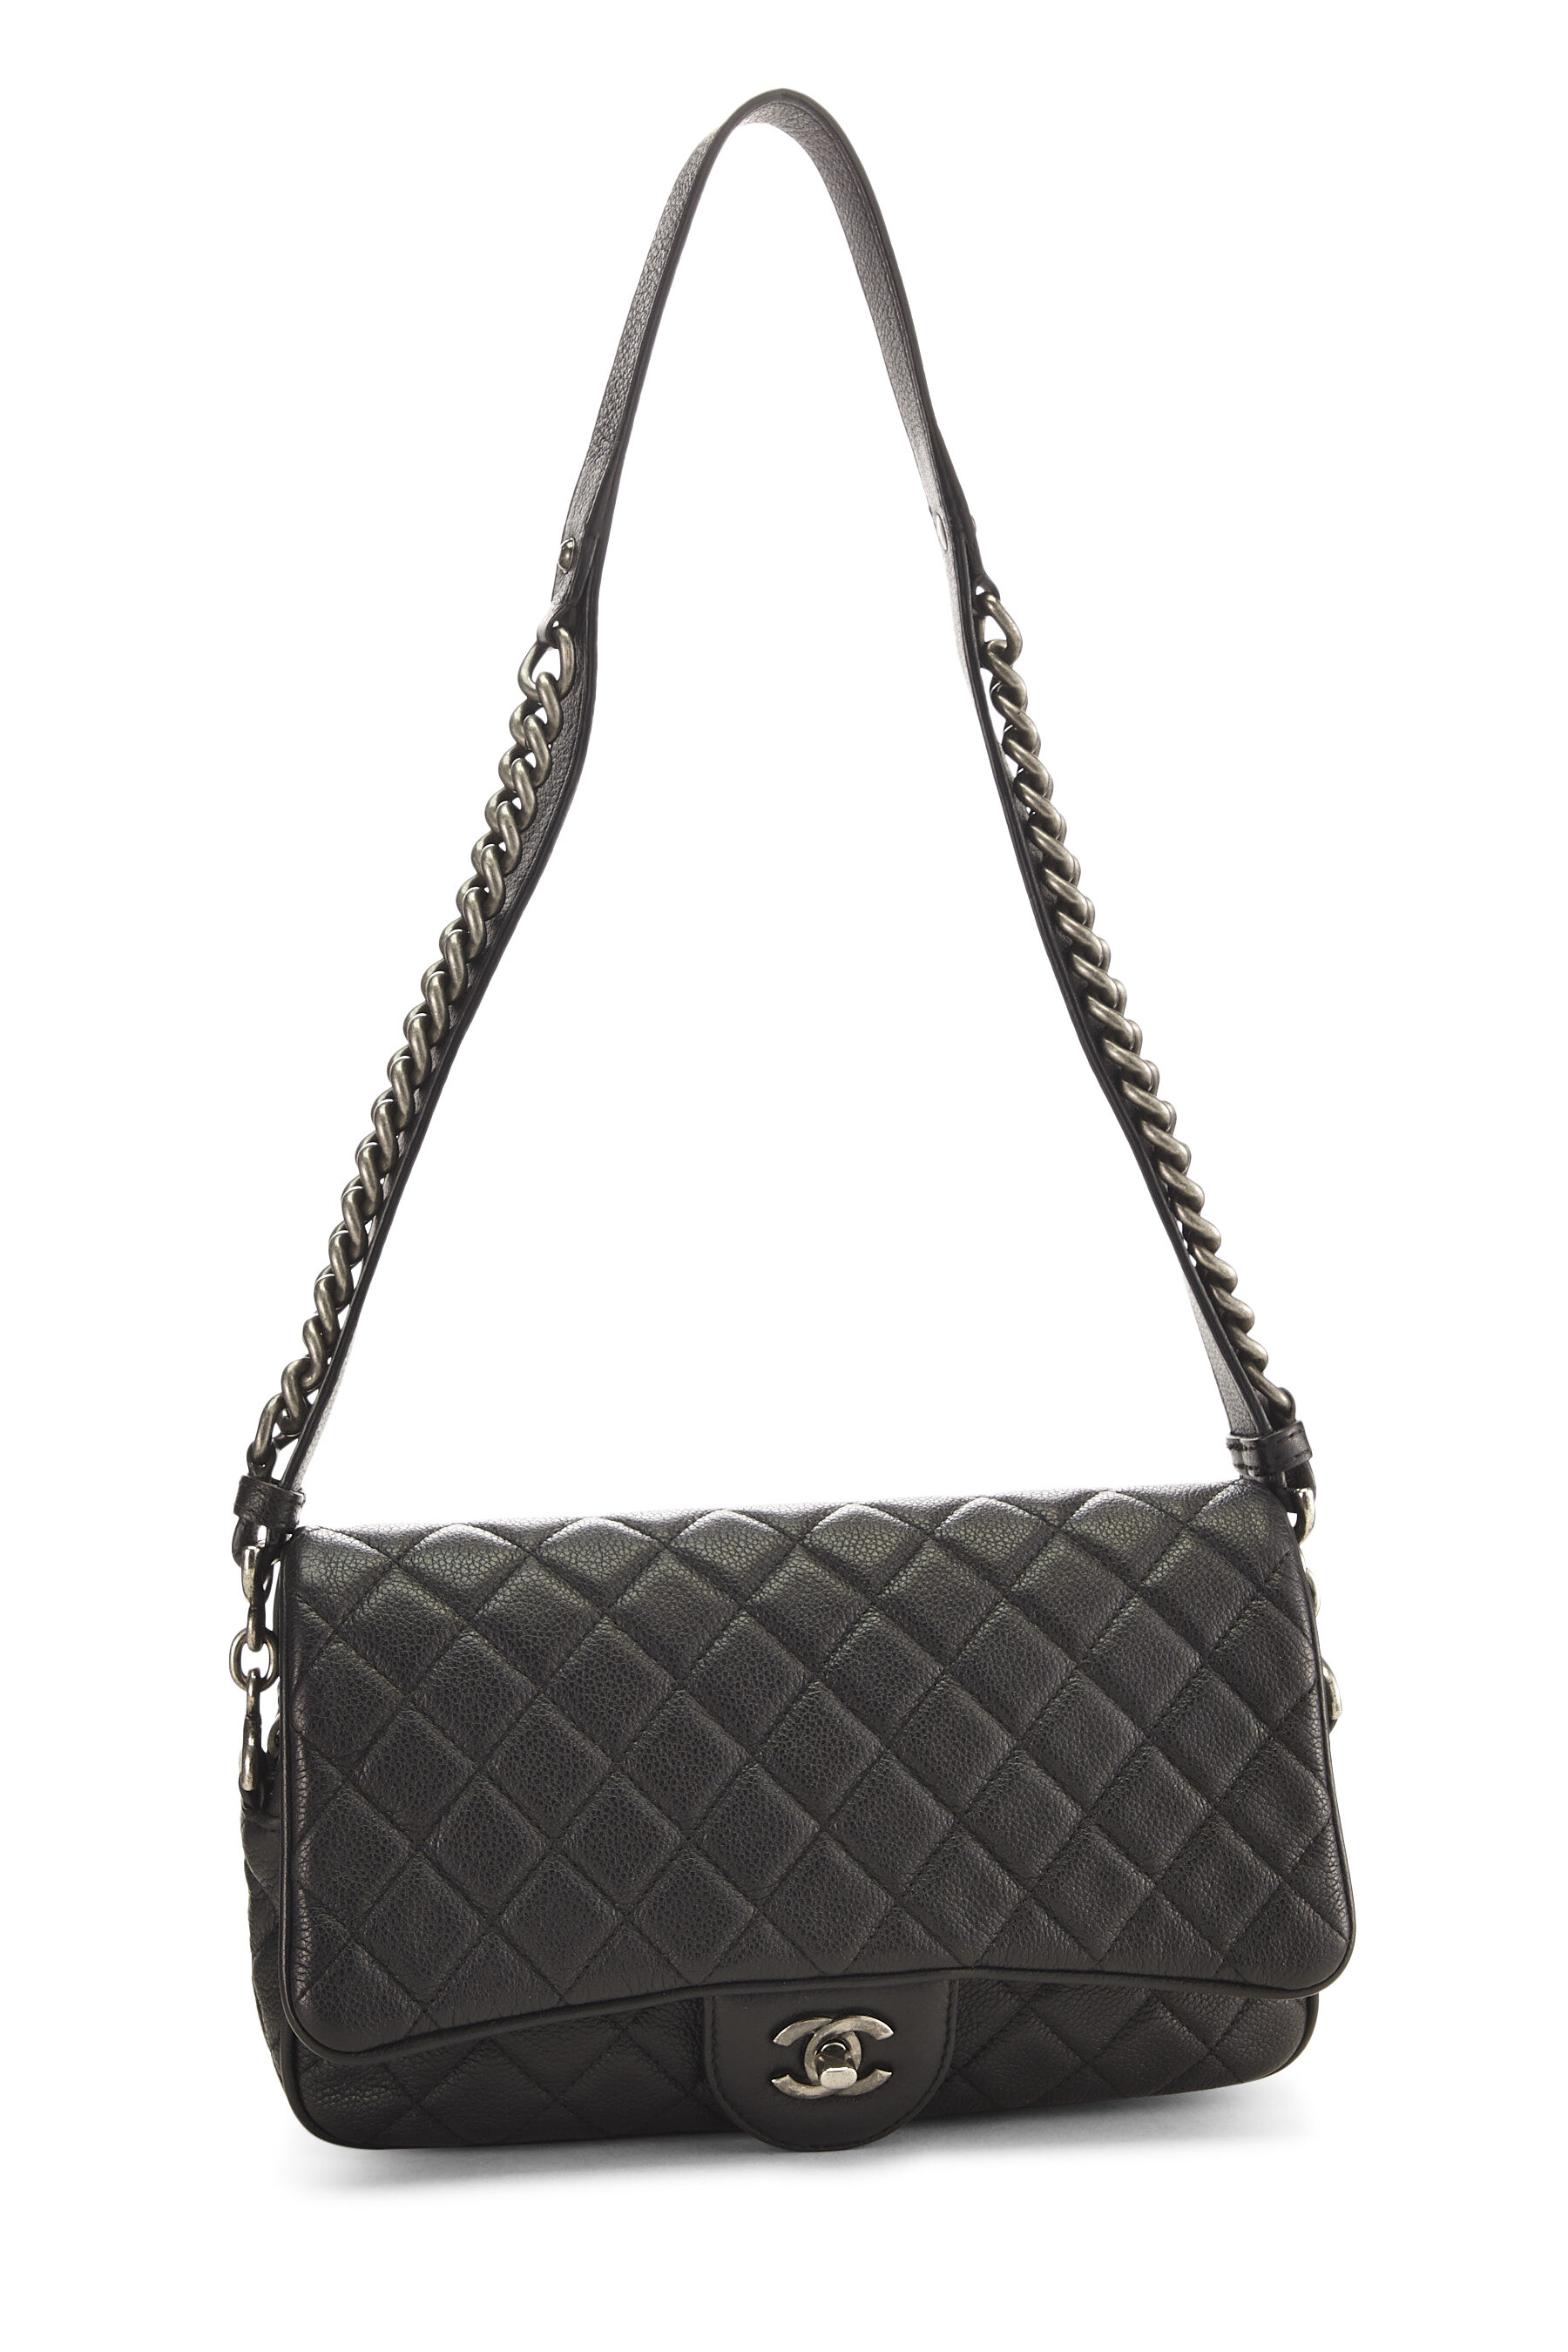 Chanel - Black Quilted Caviar Easy Flap Medium